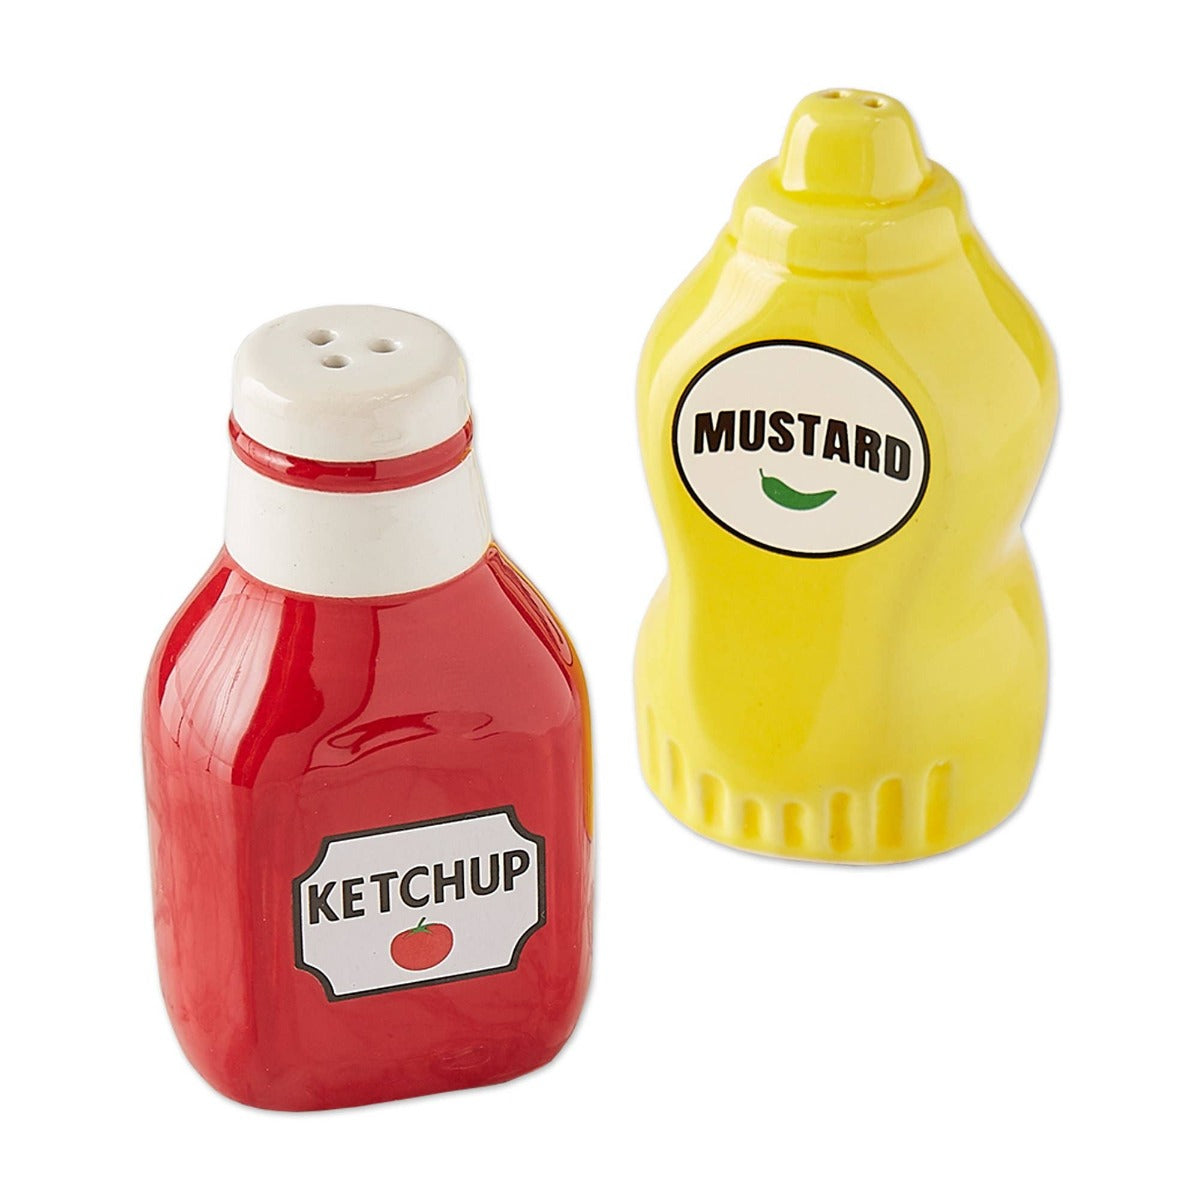 salt and pepper shaker in the shape of a mustard and ketchup bottle shape, olive and basket